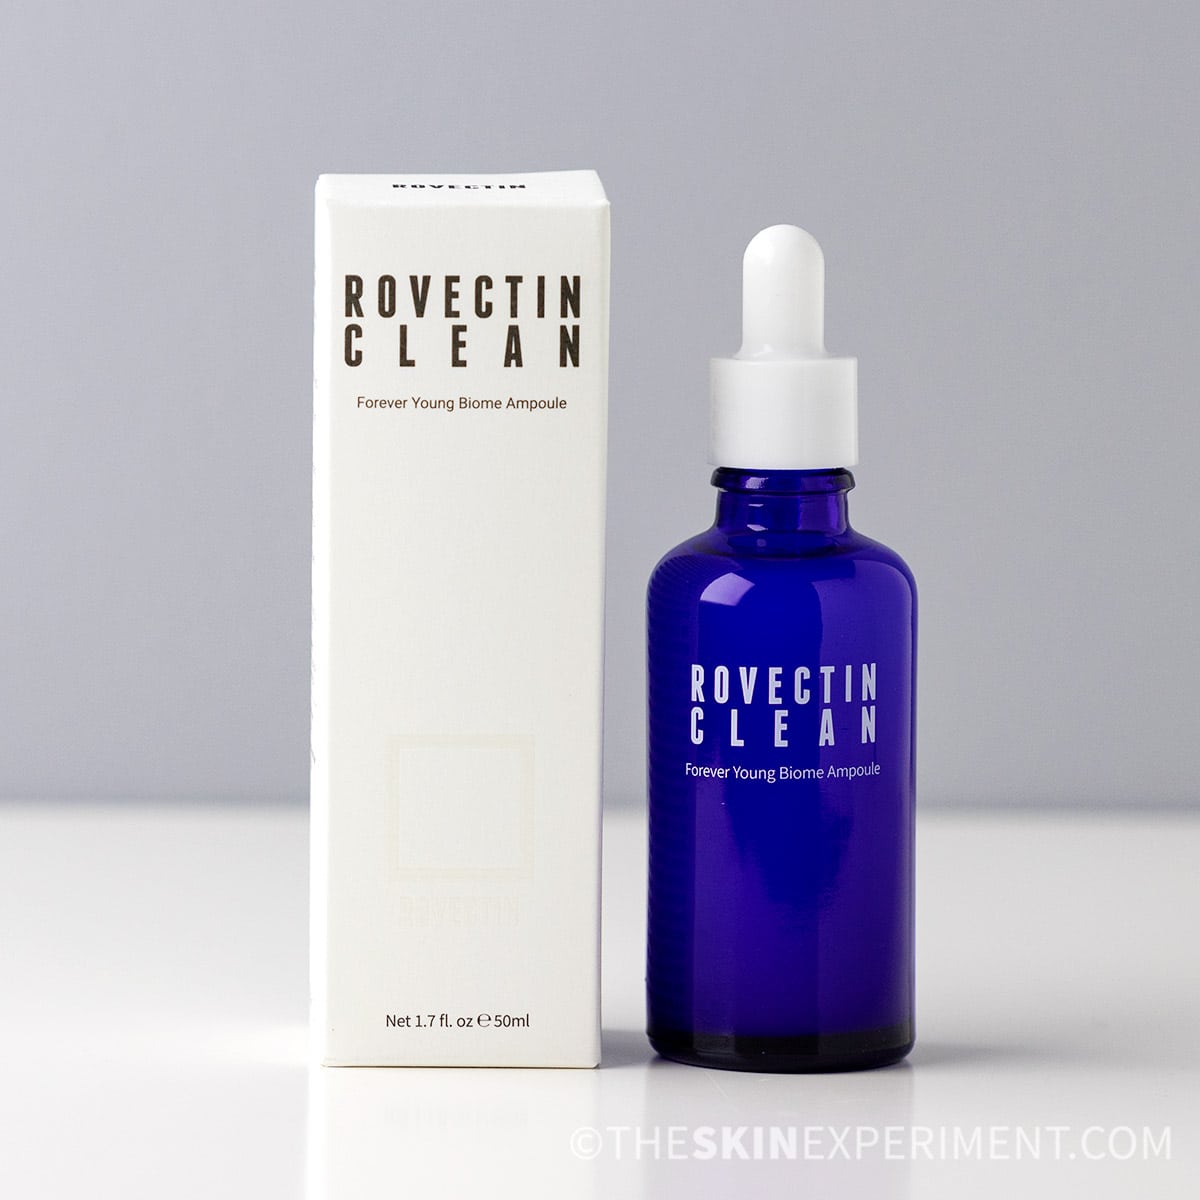 Rovectin Clean Forever Young Biome Ampoule Review